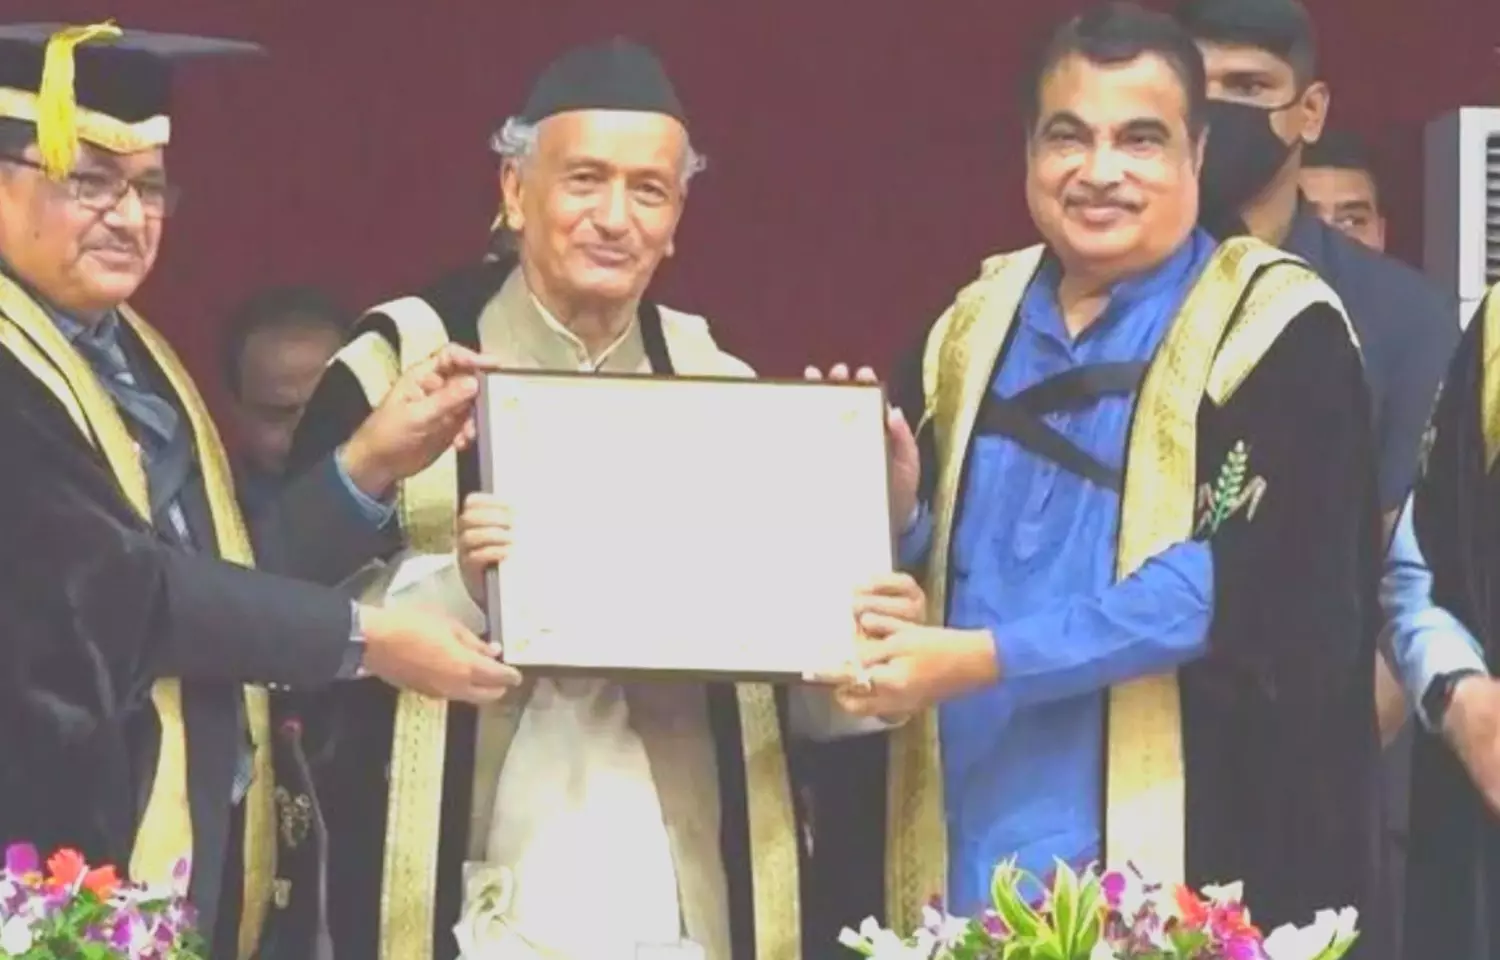 Maha: Union Minister Nitin Gadkari conferred with honorary Doctor of Science degree